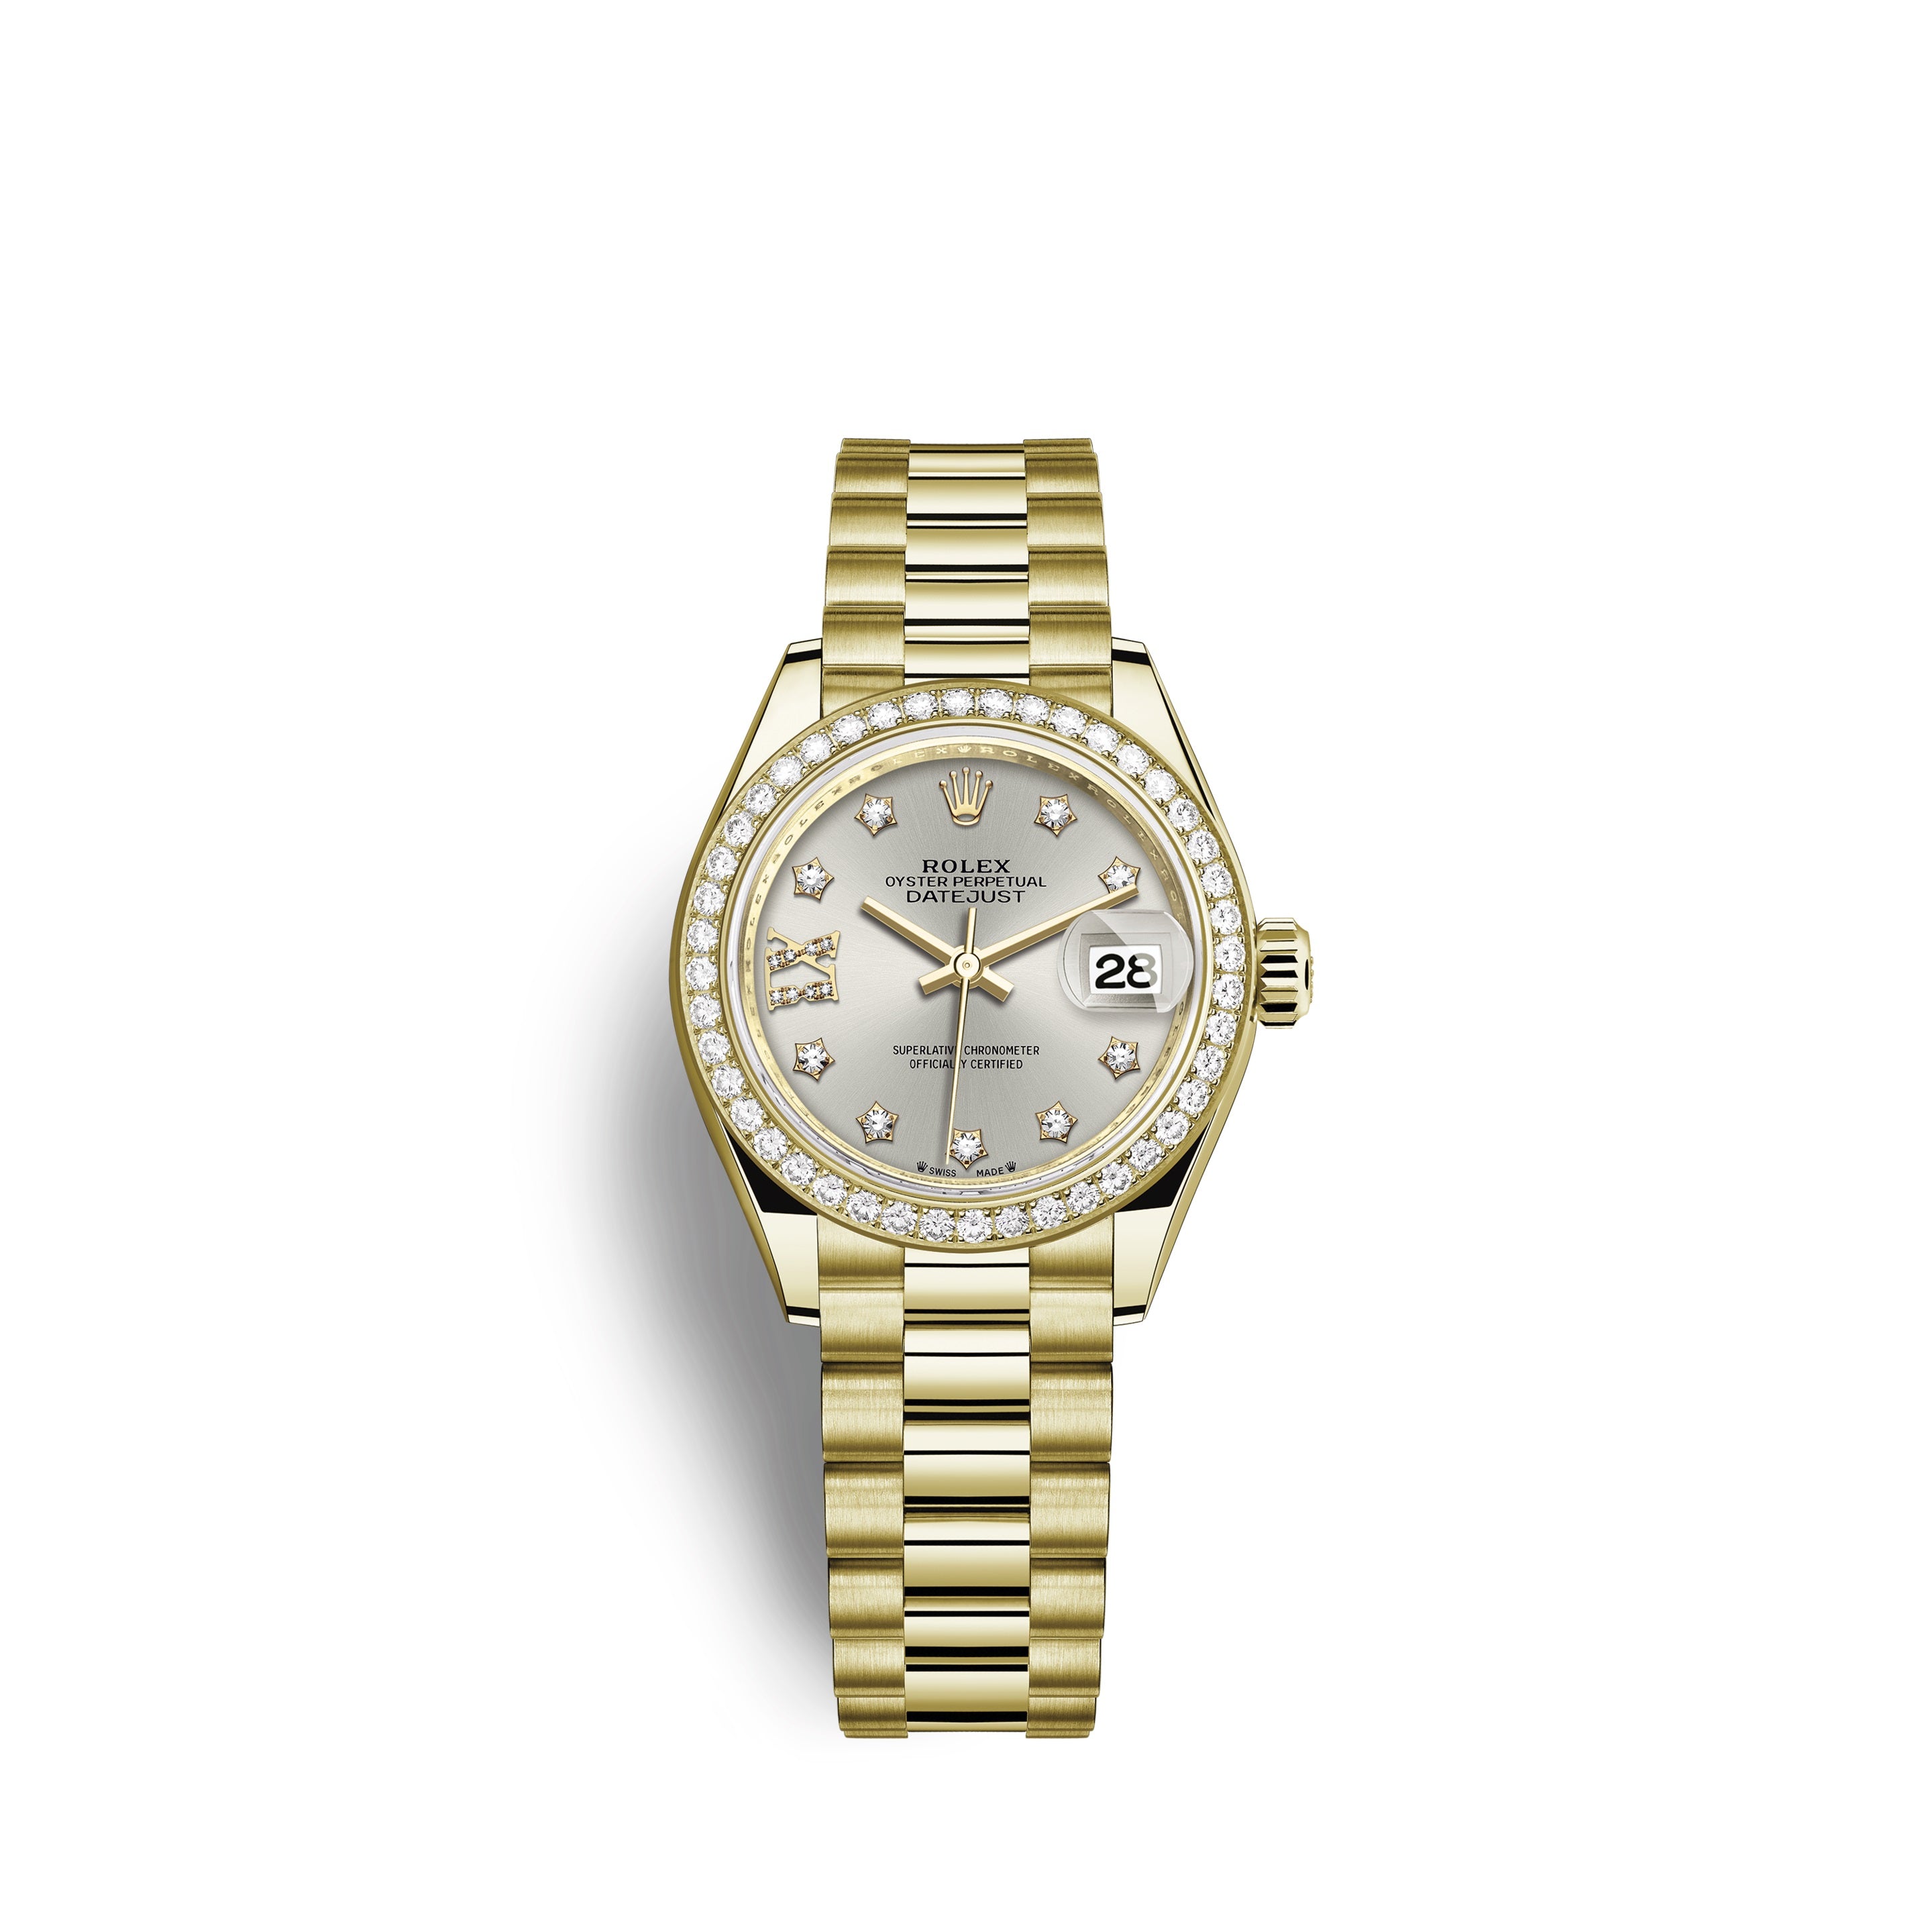 Rolex Women's Lady Datejust 28 Stainless Steel and 18kt Yellow Gold Silver Dial Watch